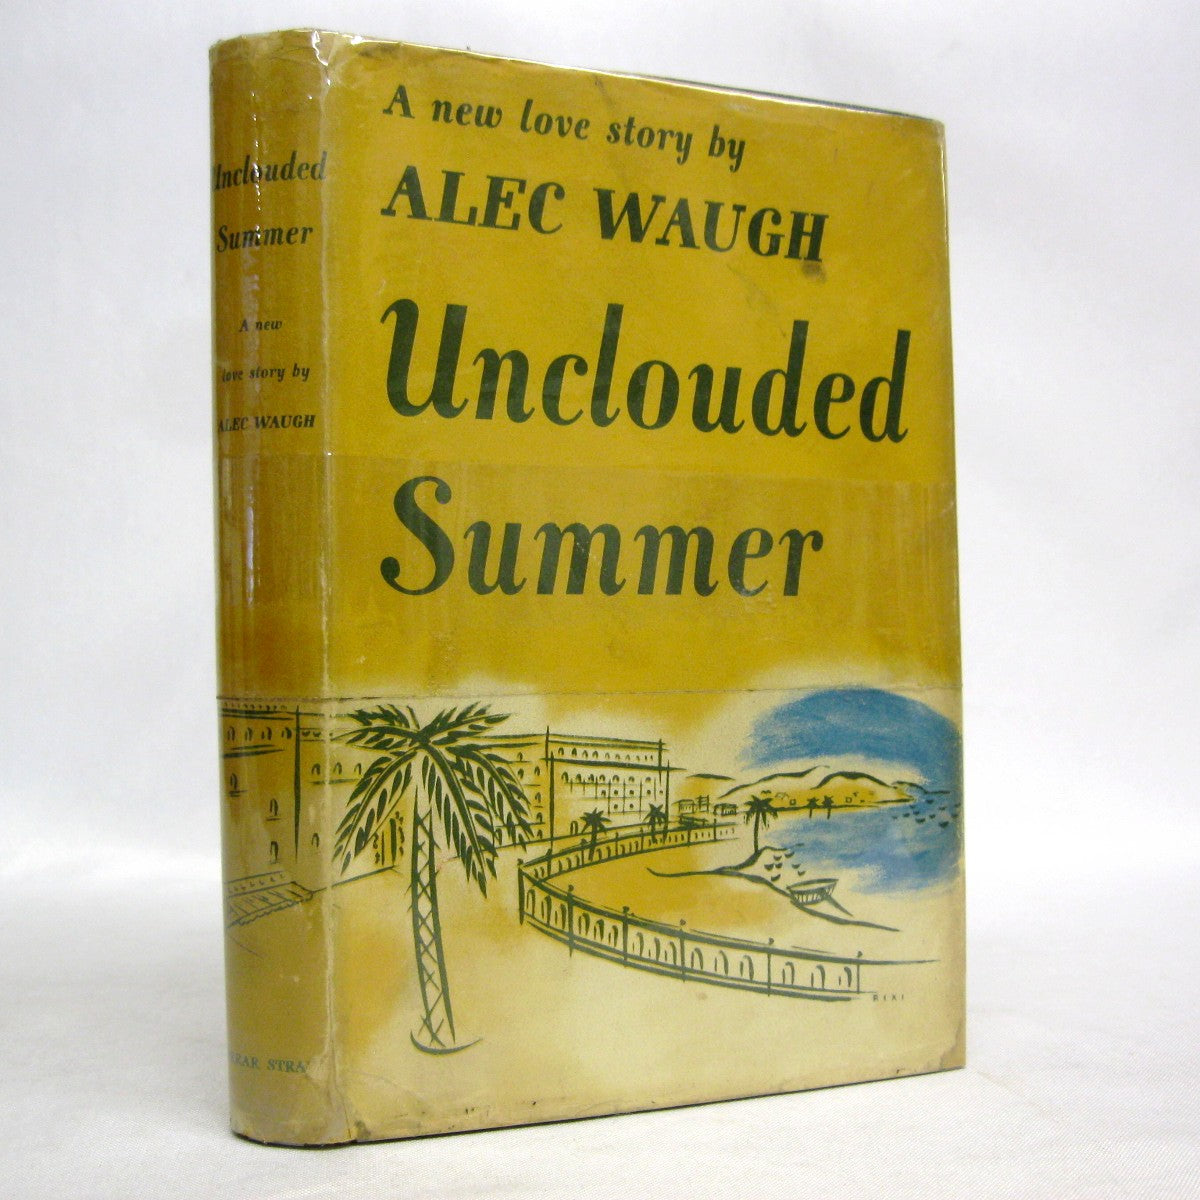 Unclouded Summer by Alec Waugh